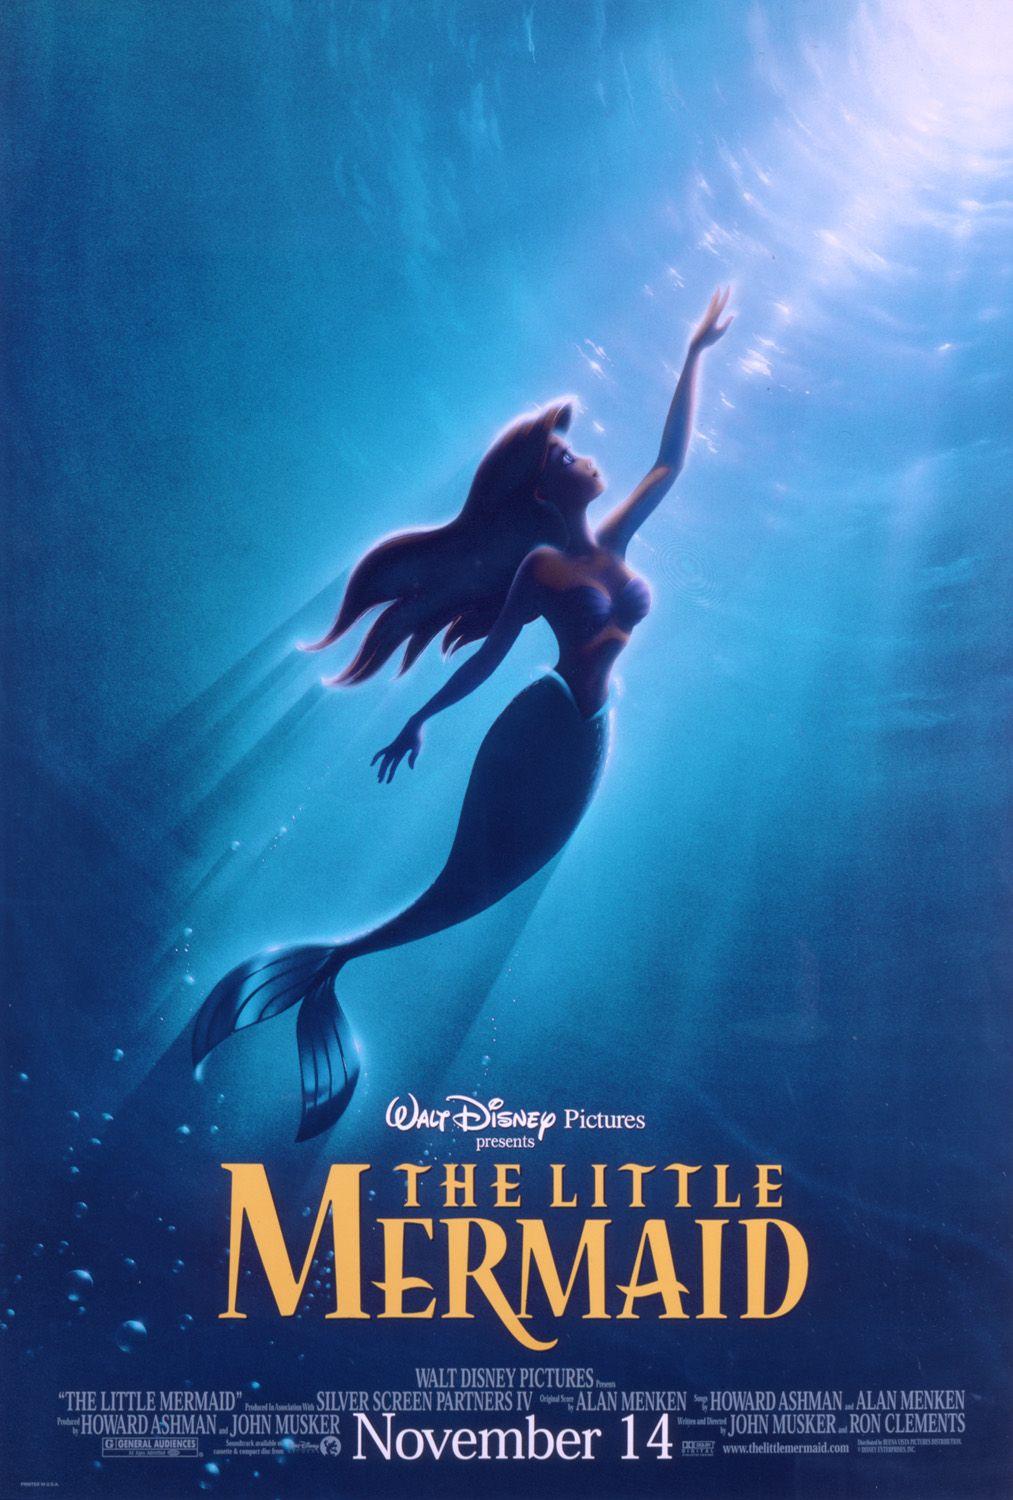 Disney's The Little Mermaid Is ABC's Next Live TV Musical